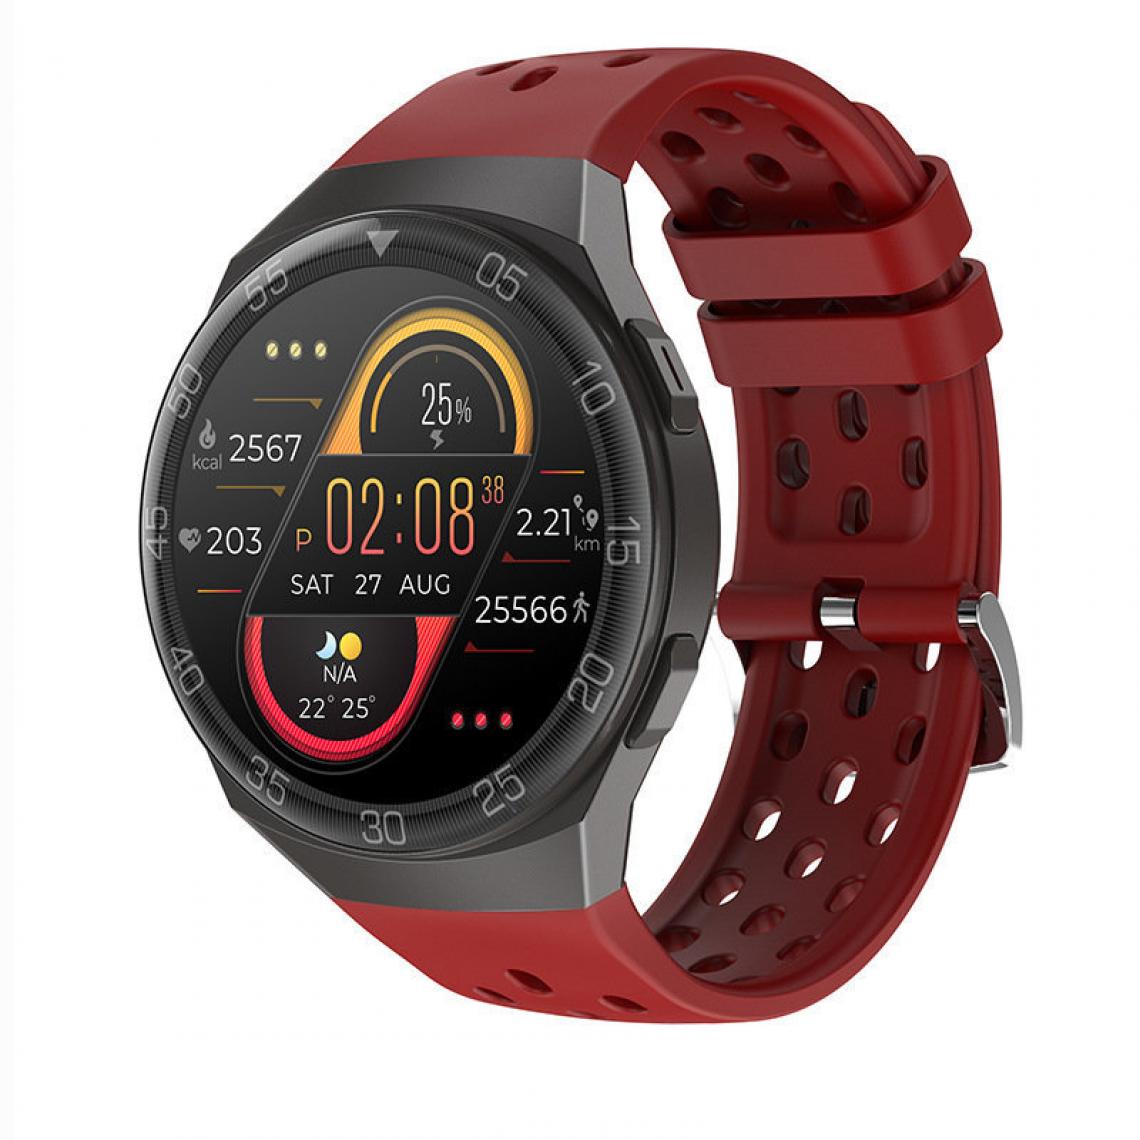 Chronotech Montres - Chronus MT68 Smart Watch for Men Women,1.28-inch Watchface Changeable Smartwatch for Android and iPhones, Heart Rate Monitor, Message and Phone Call Reminder, 24 Sports Modes, IP68(red) - Montre connectée